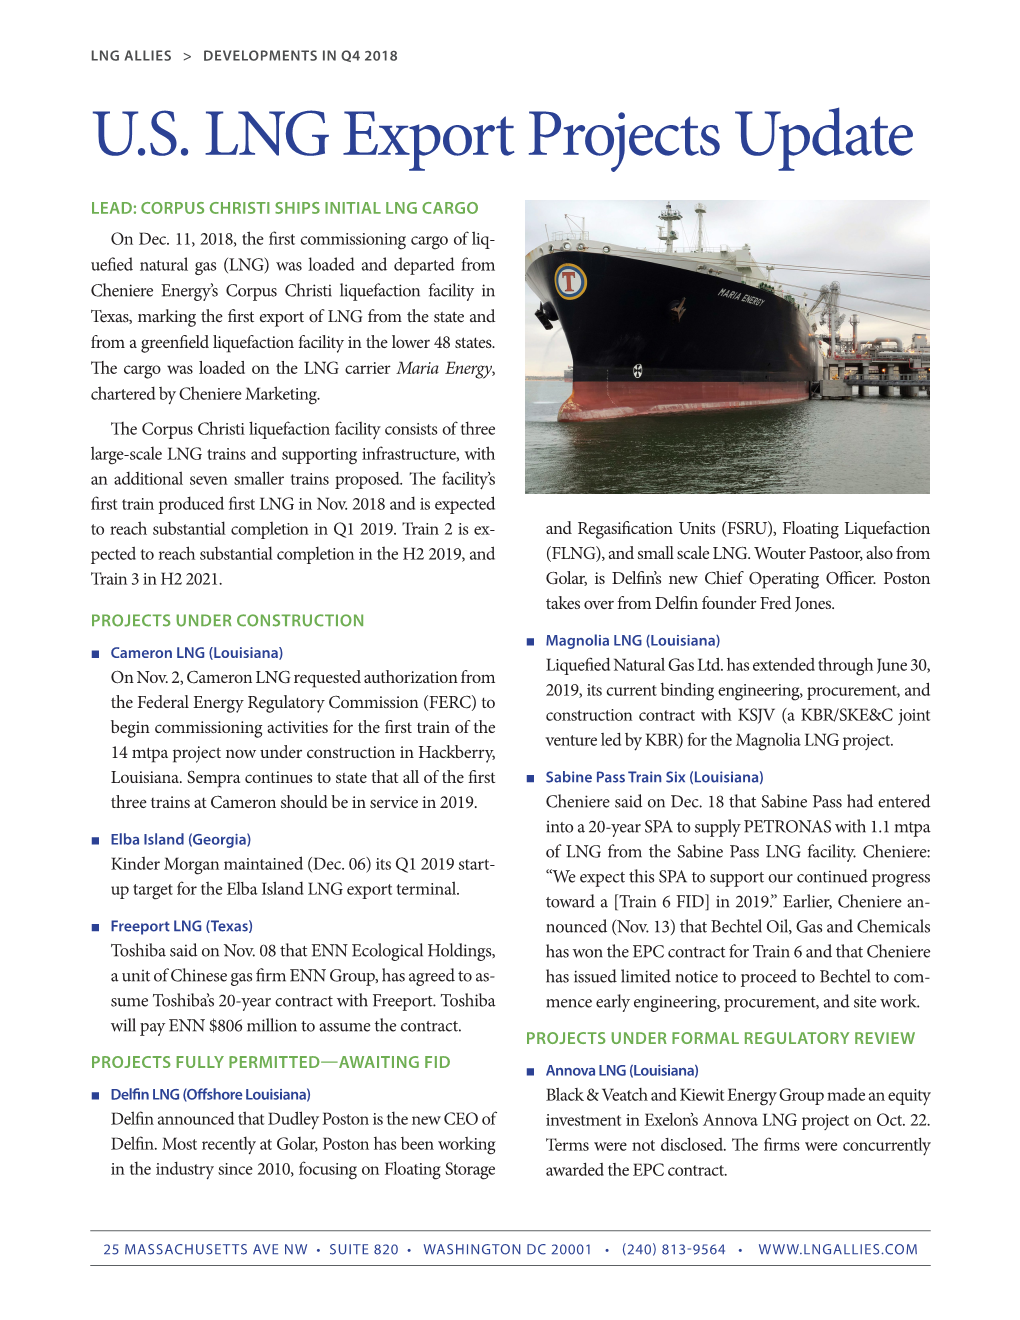 U.S. LNG Export Projects Update